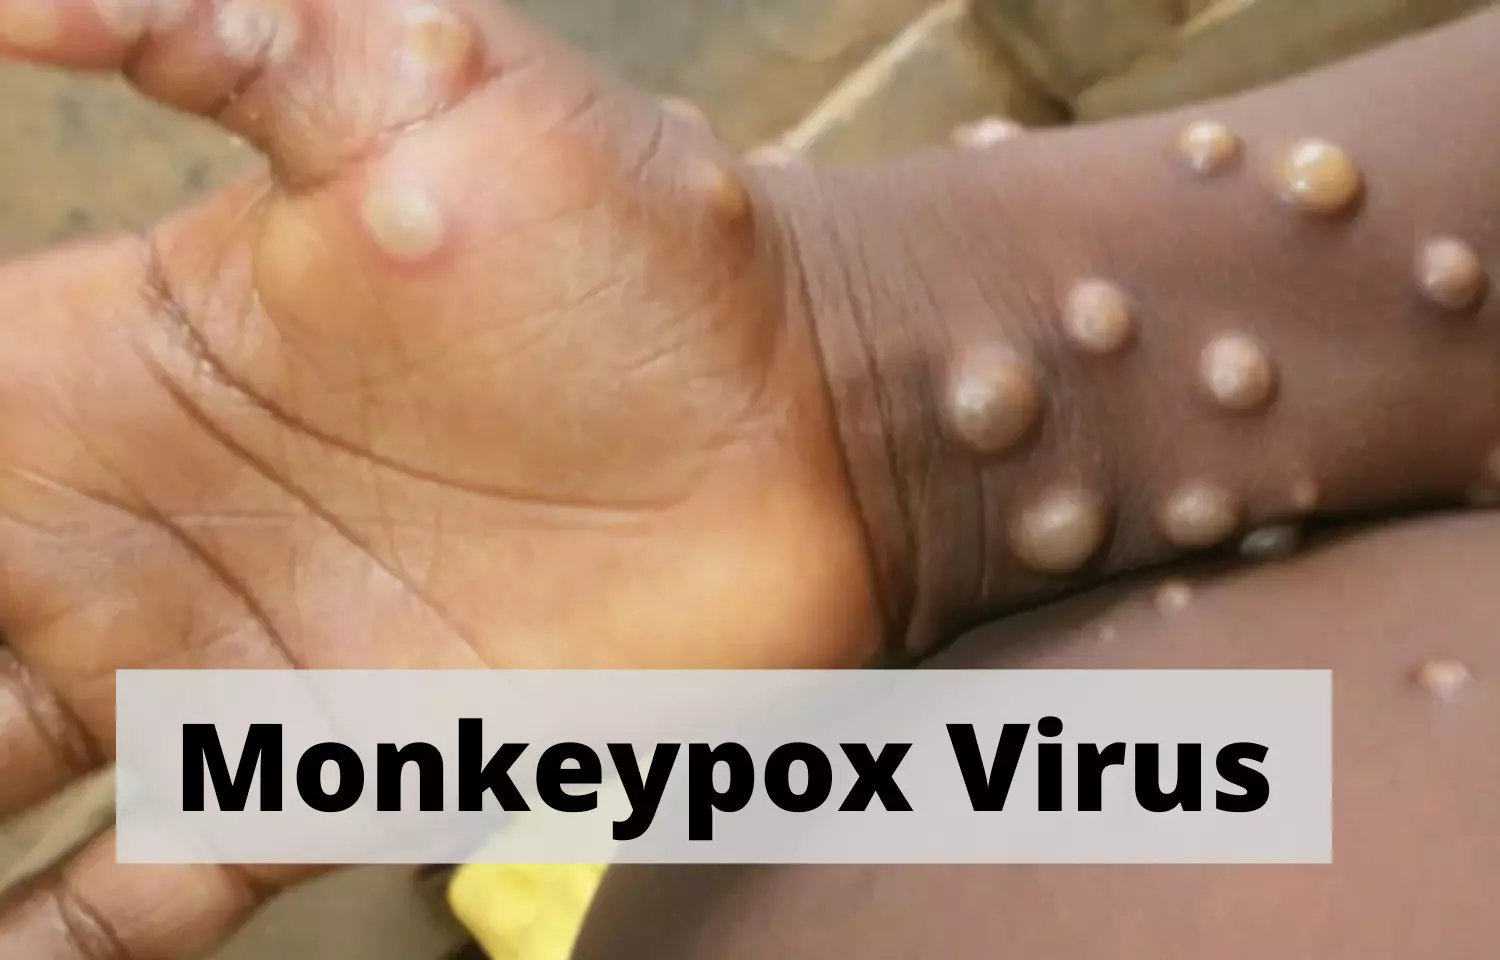 Monkeypox Virus: Health Ministry issues Guidelines for treatment